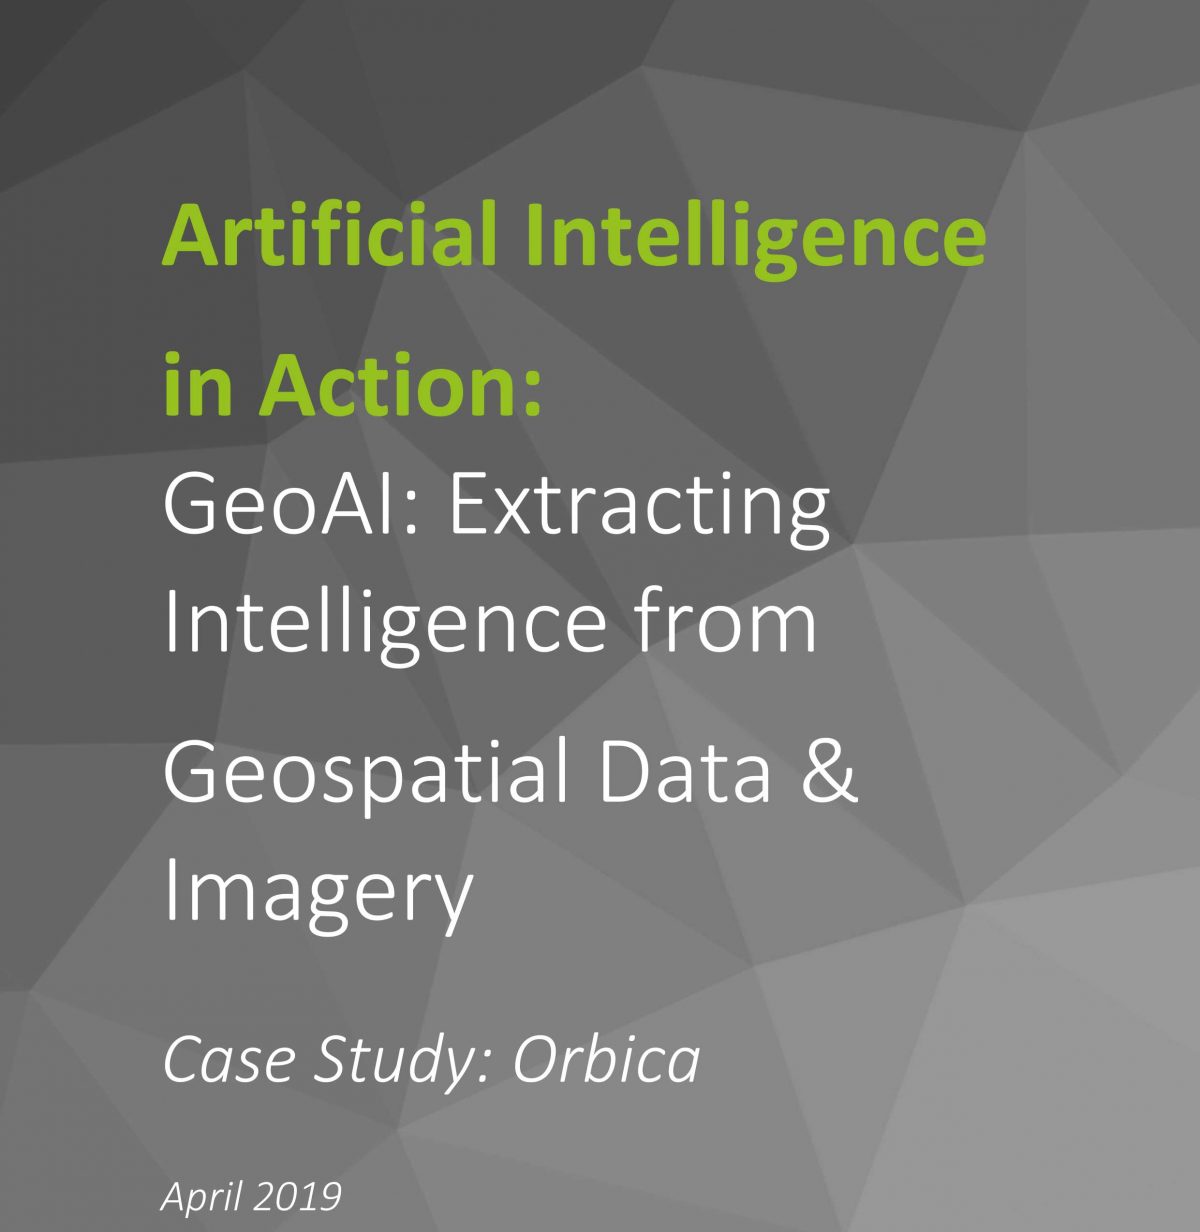 Artificial Intelligence in Action: GeoAI: Extracting Intelligence from Geospatial Data & Imagery